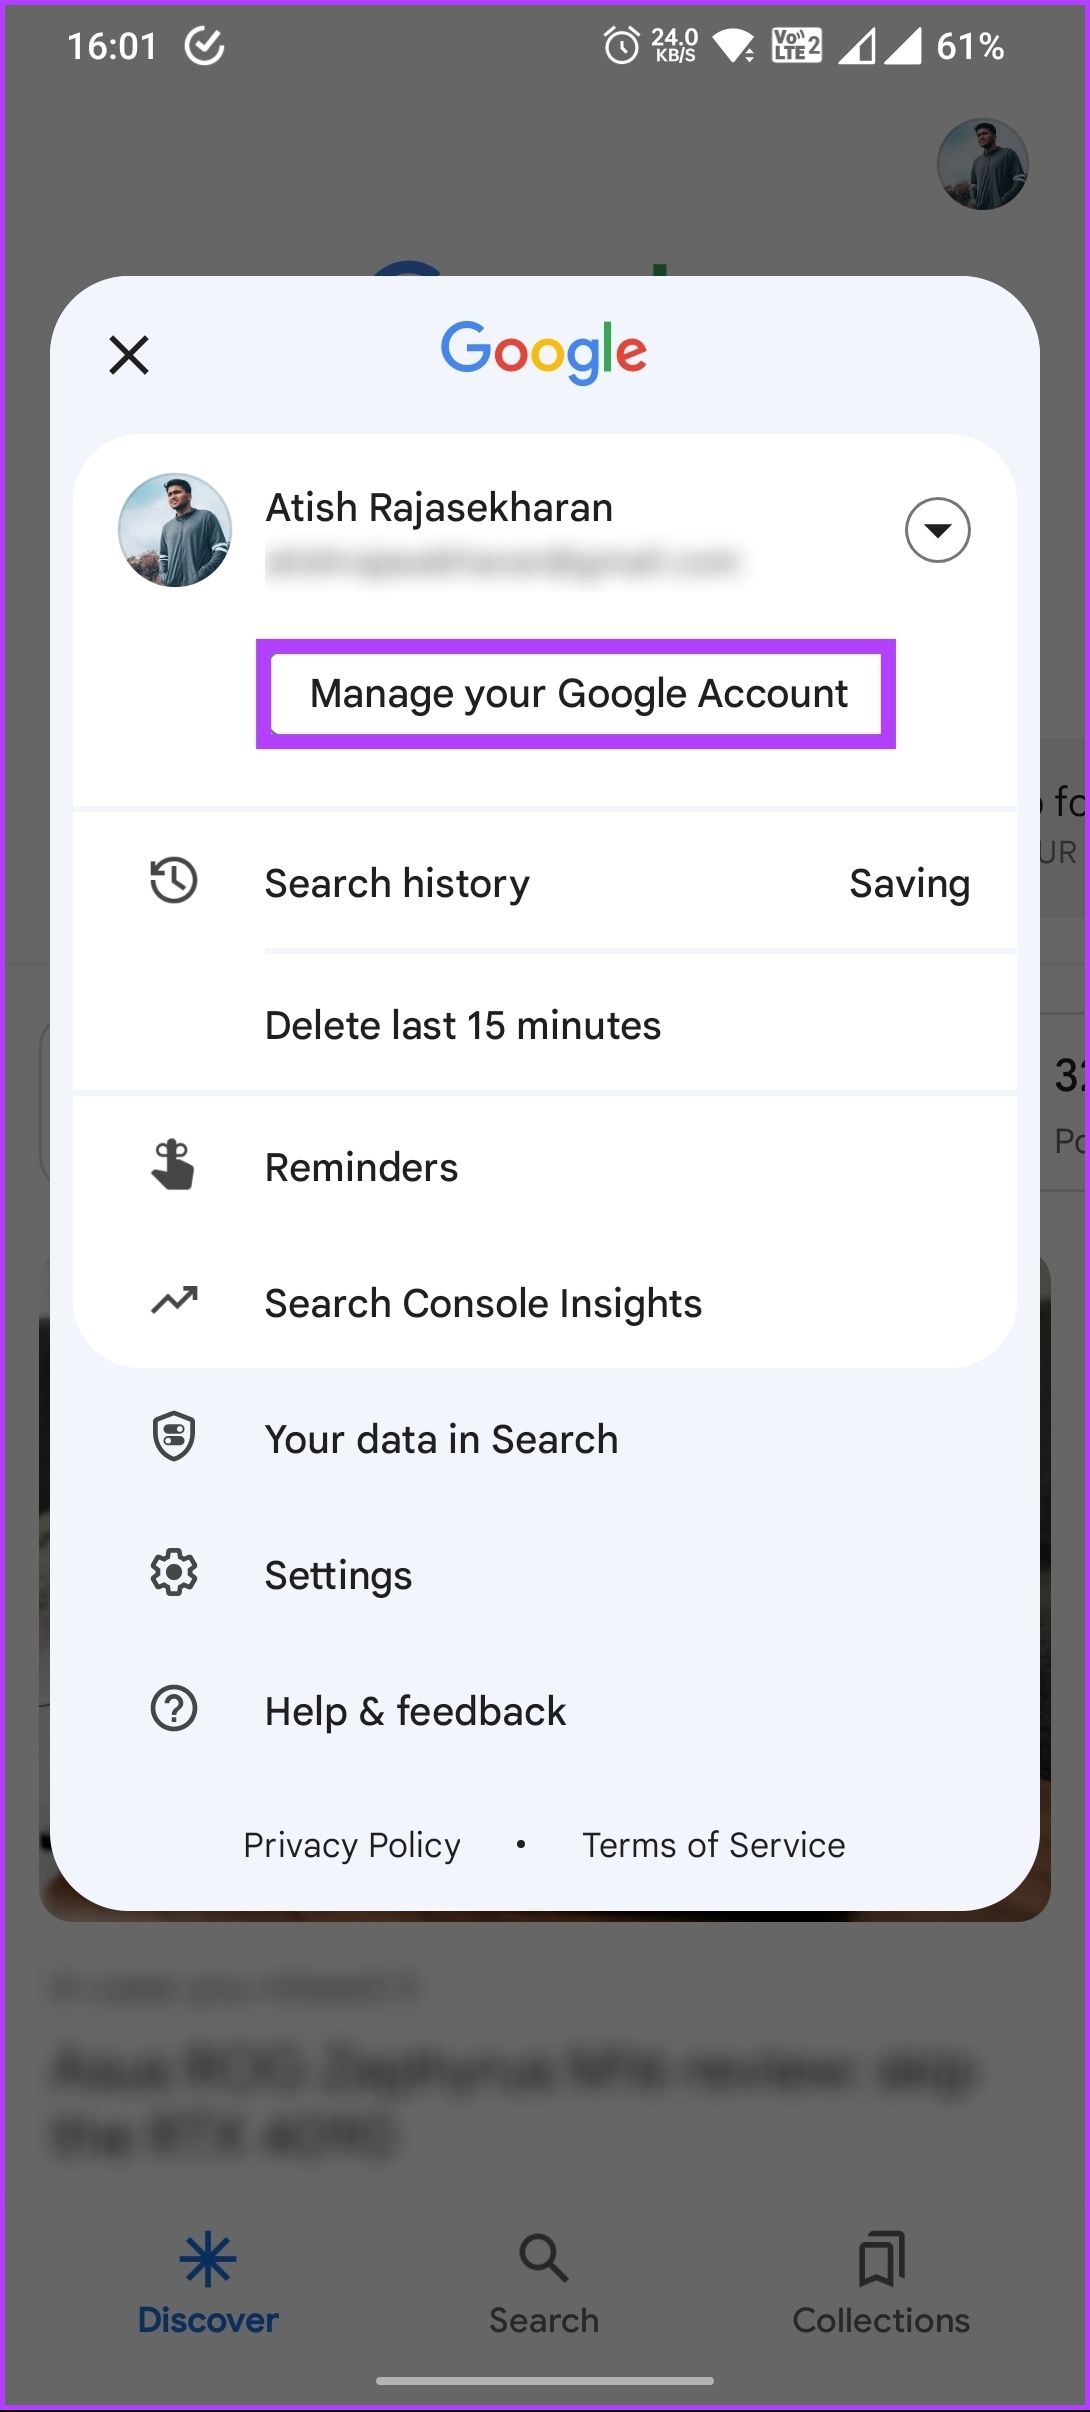 Select 'Manage your Google Account'